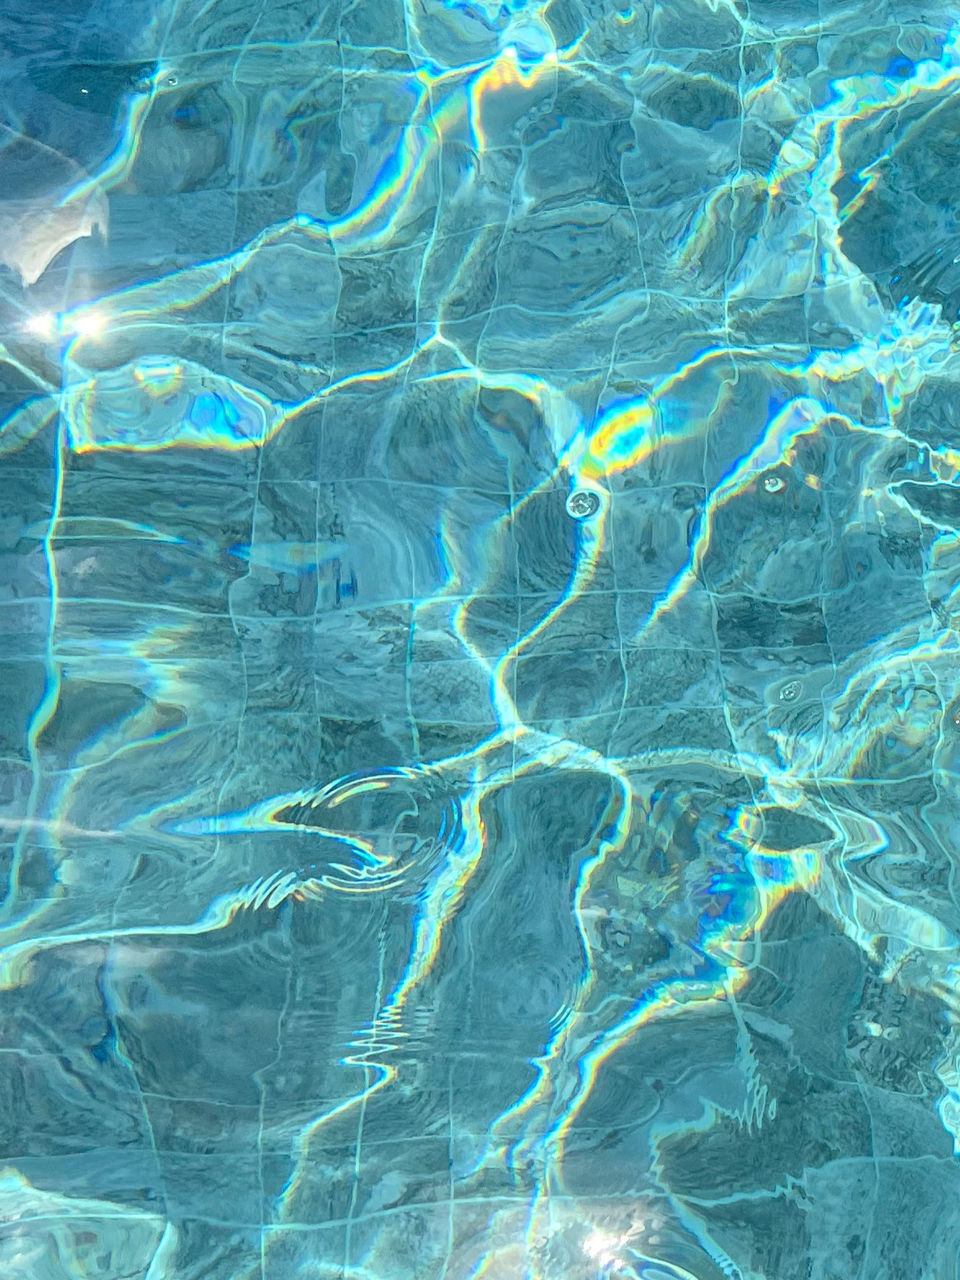 full frame, backgrounds, no people, water, pattern, nature, blue, swimming pool, marine biology, rippled, azure, underwater, ocean, abstract, wave, aqua, turquoise, sea, refraction, outdoors, day, turquoise colored, high angle view, transparent